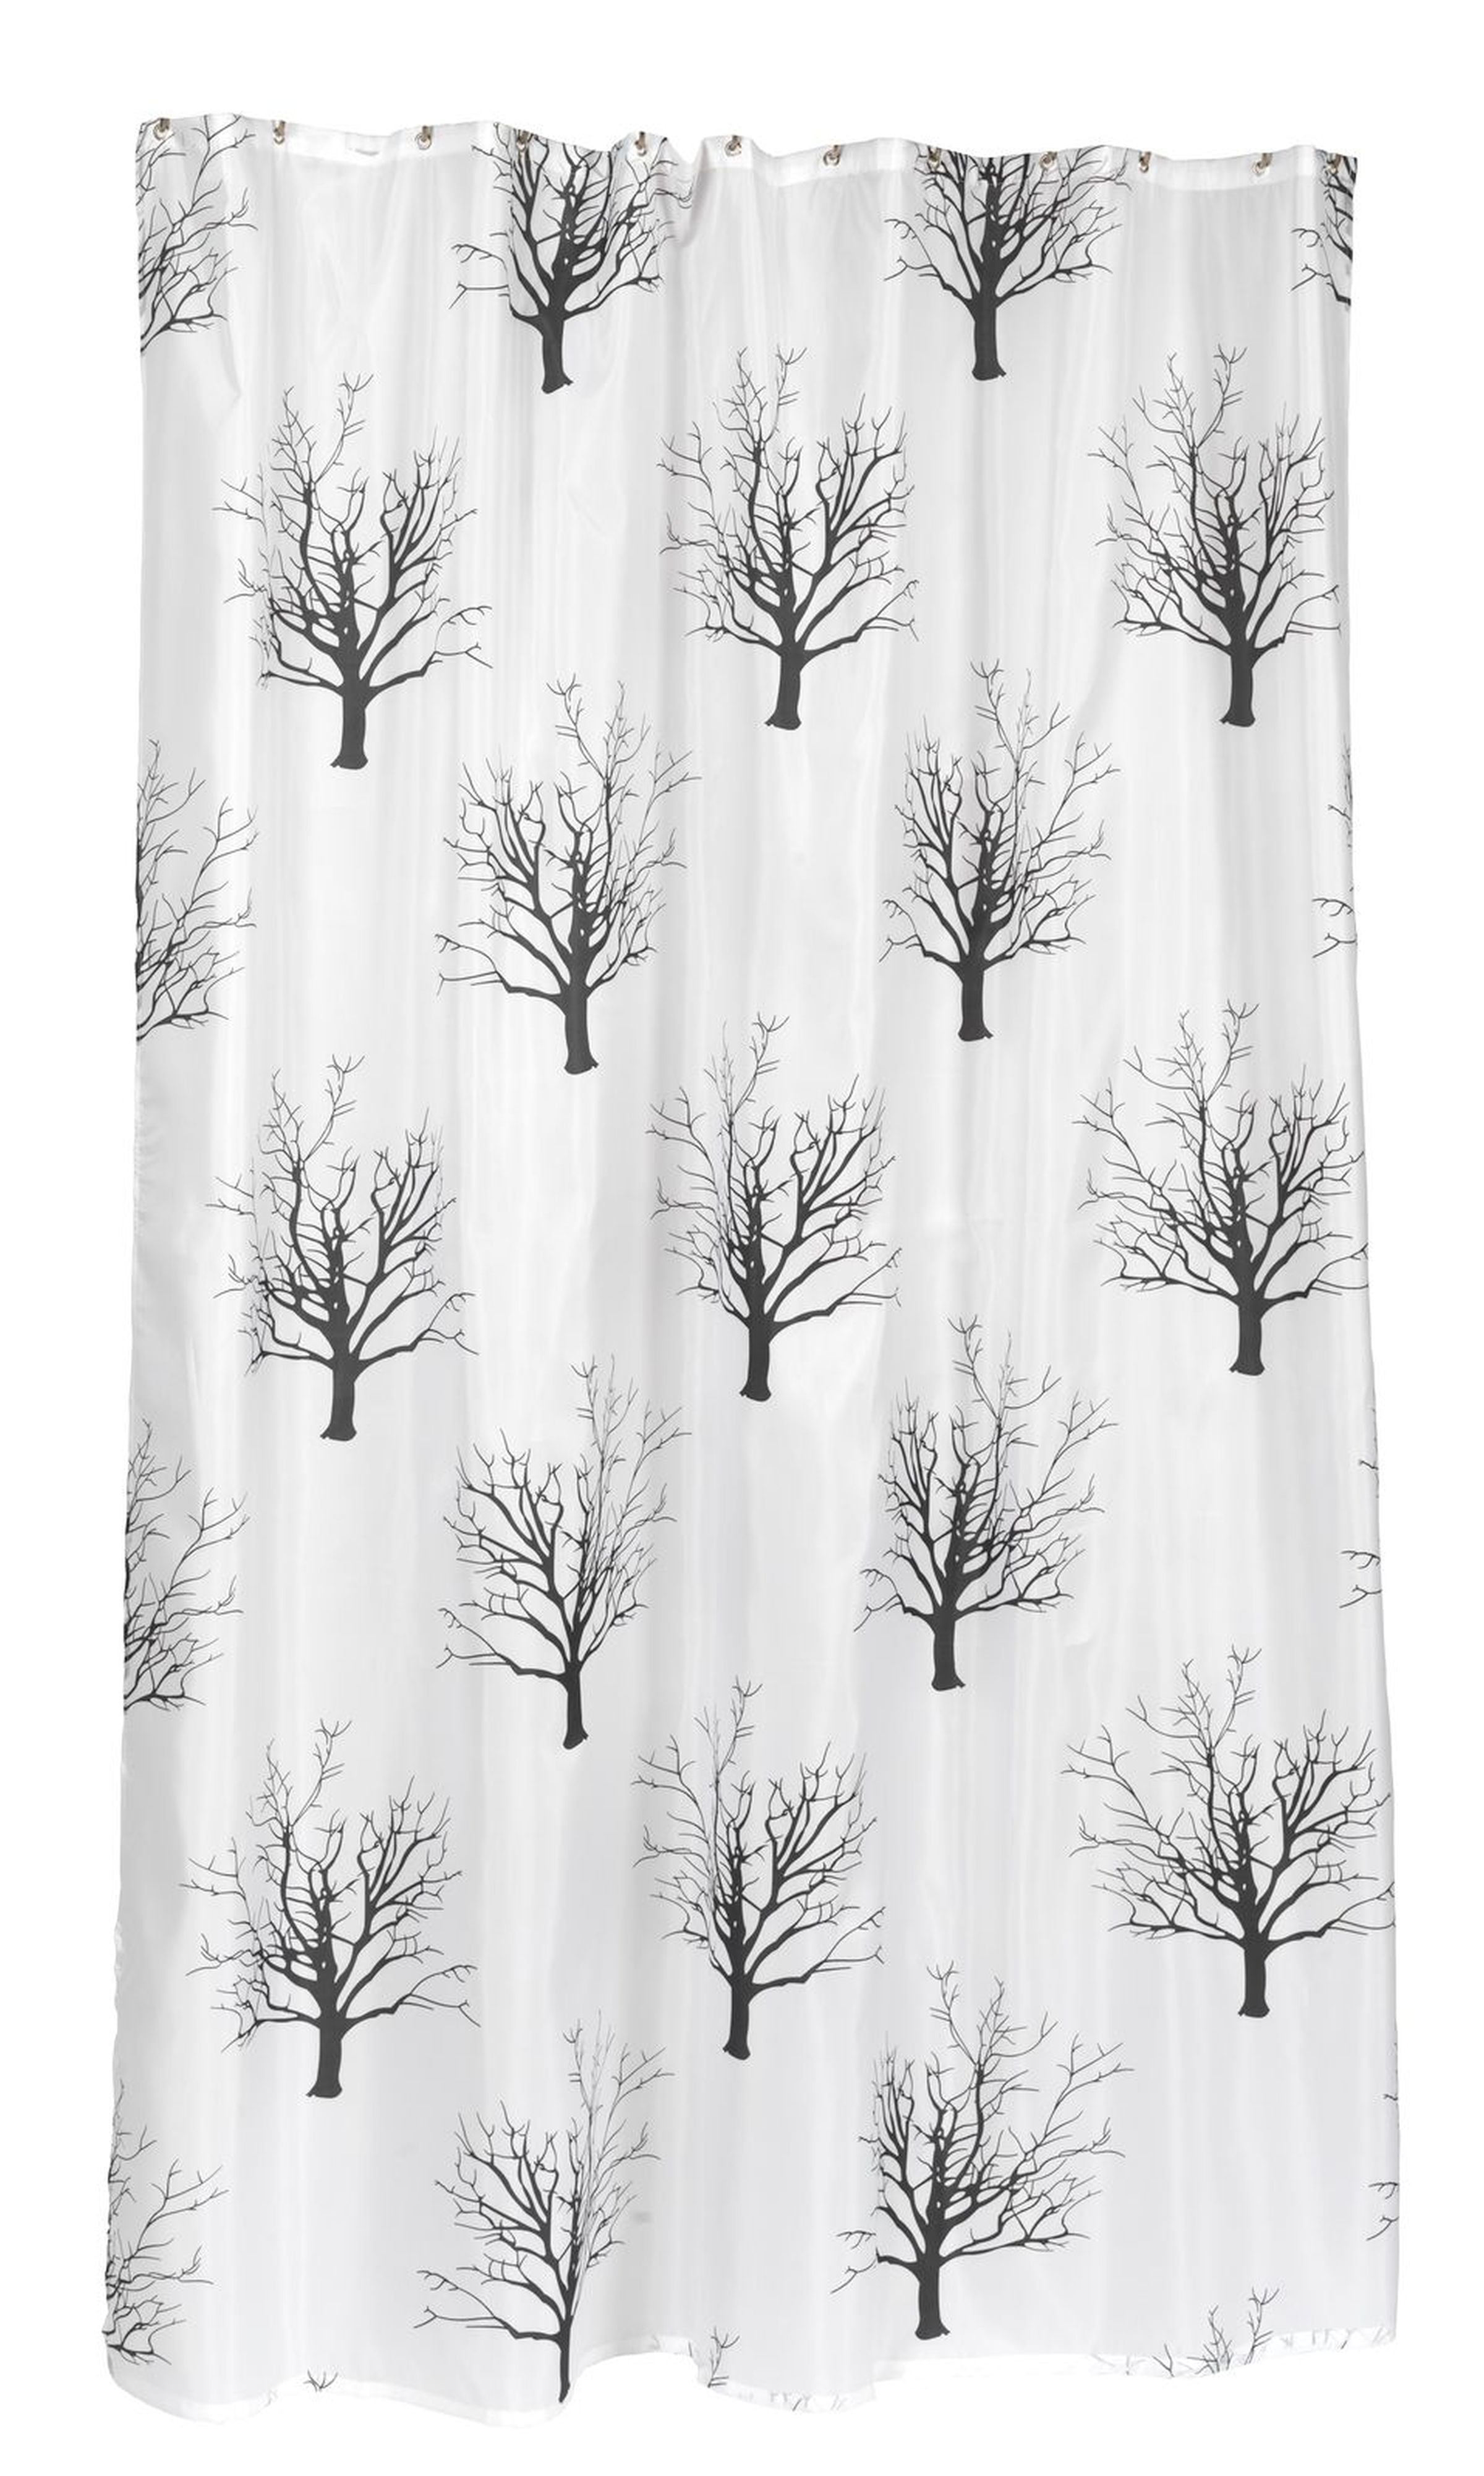 Wide Fabric Shower Curtain 108 X, 108 Shower Curtain Fabric